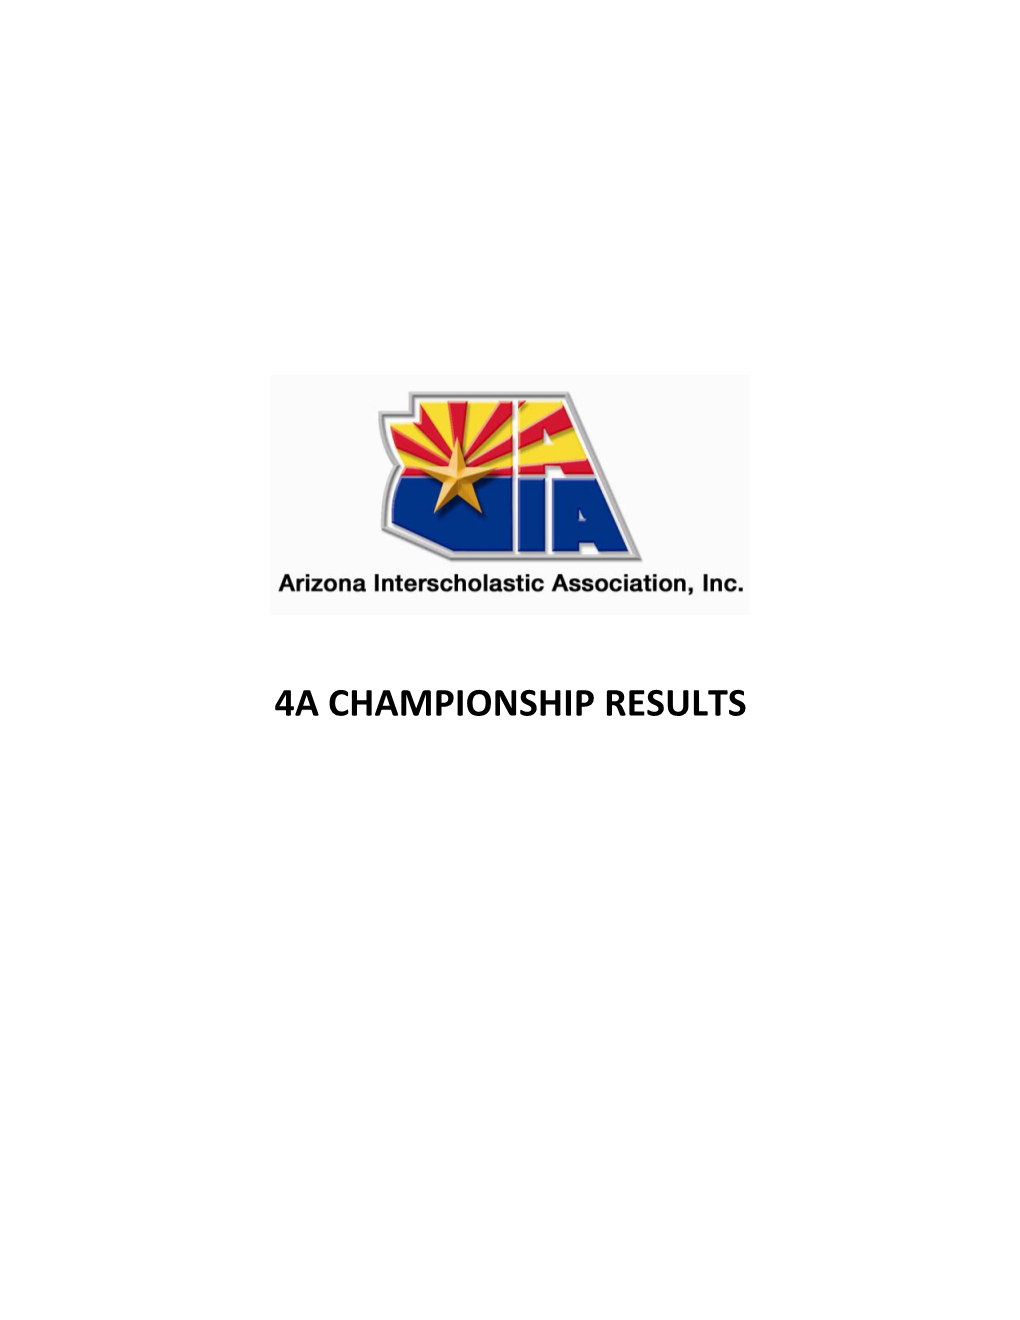 4A Championship Results